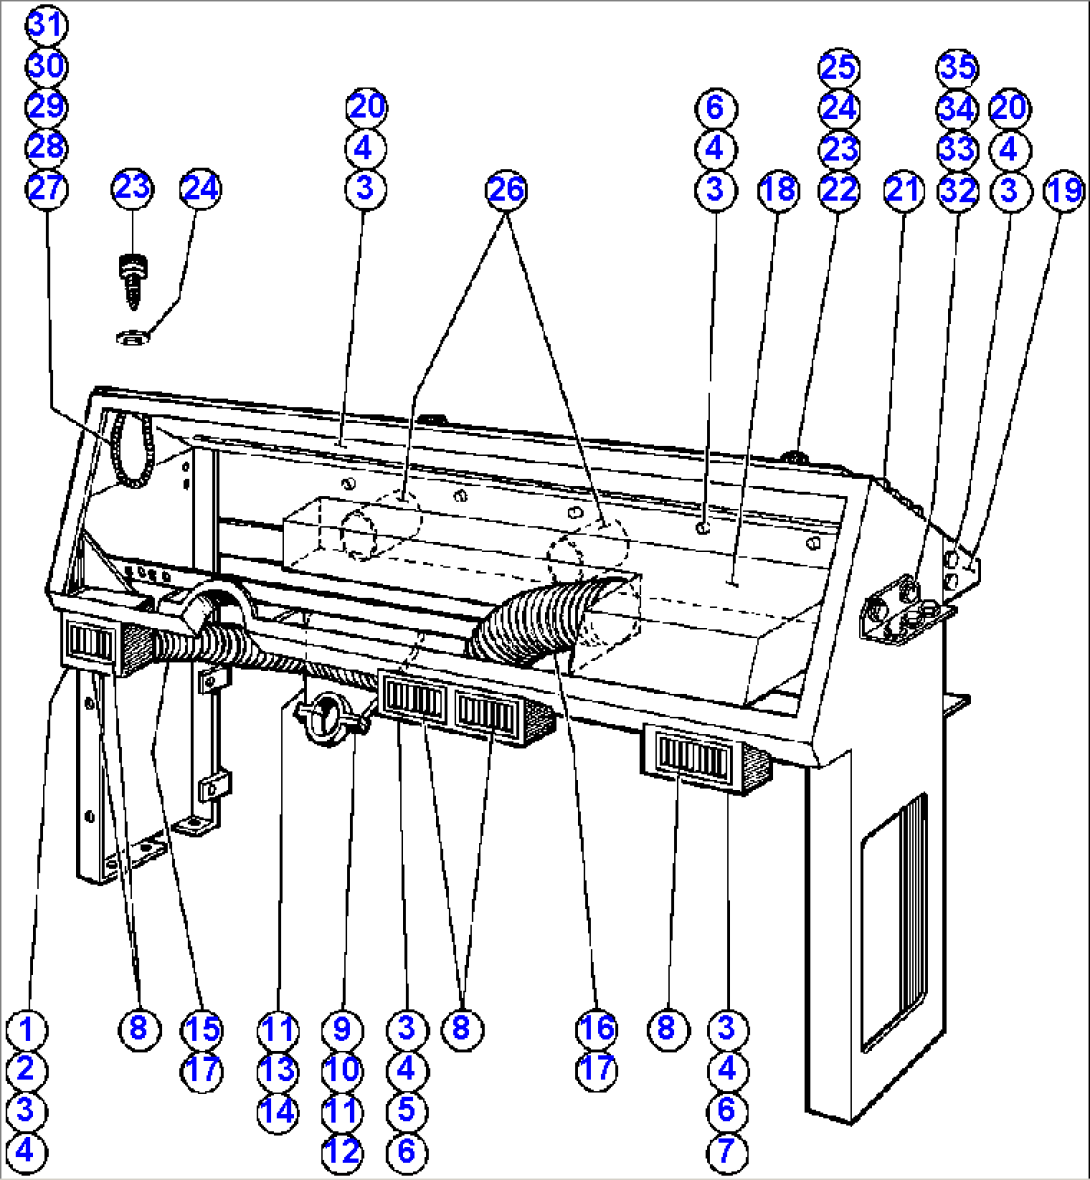 CONSOLE ASSEMBLY (PB7515)